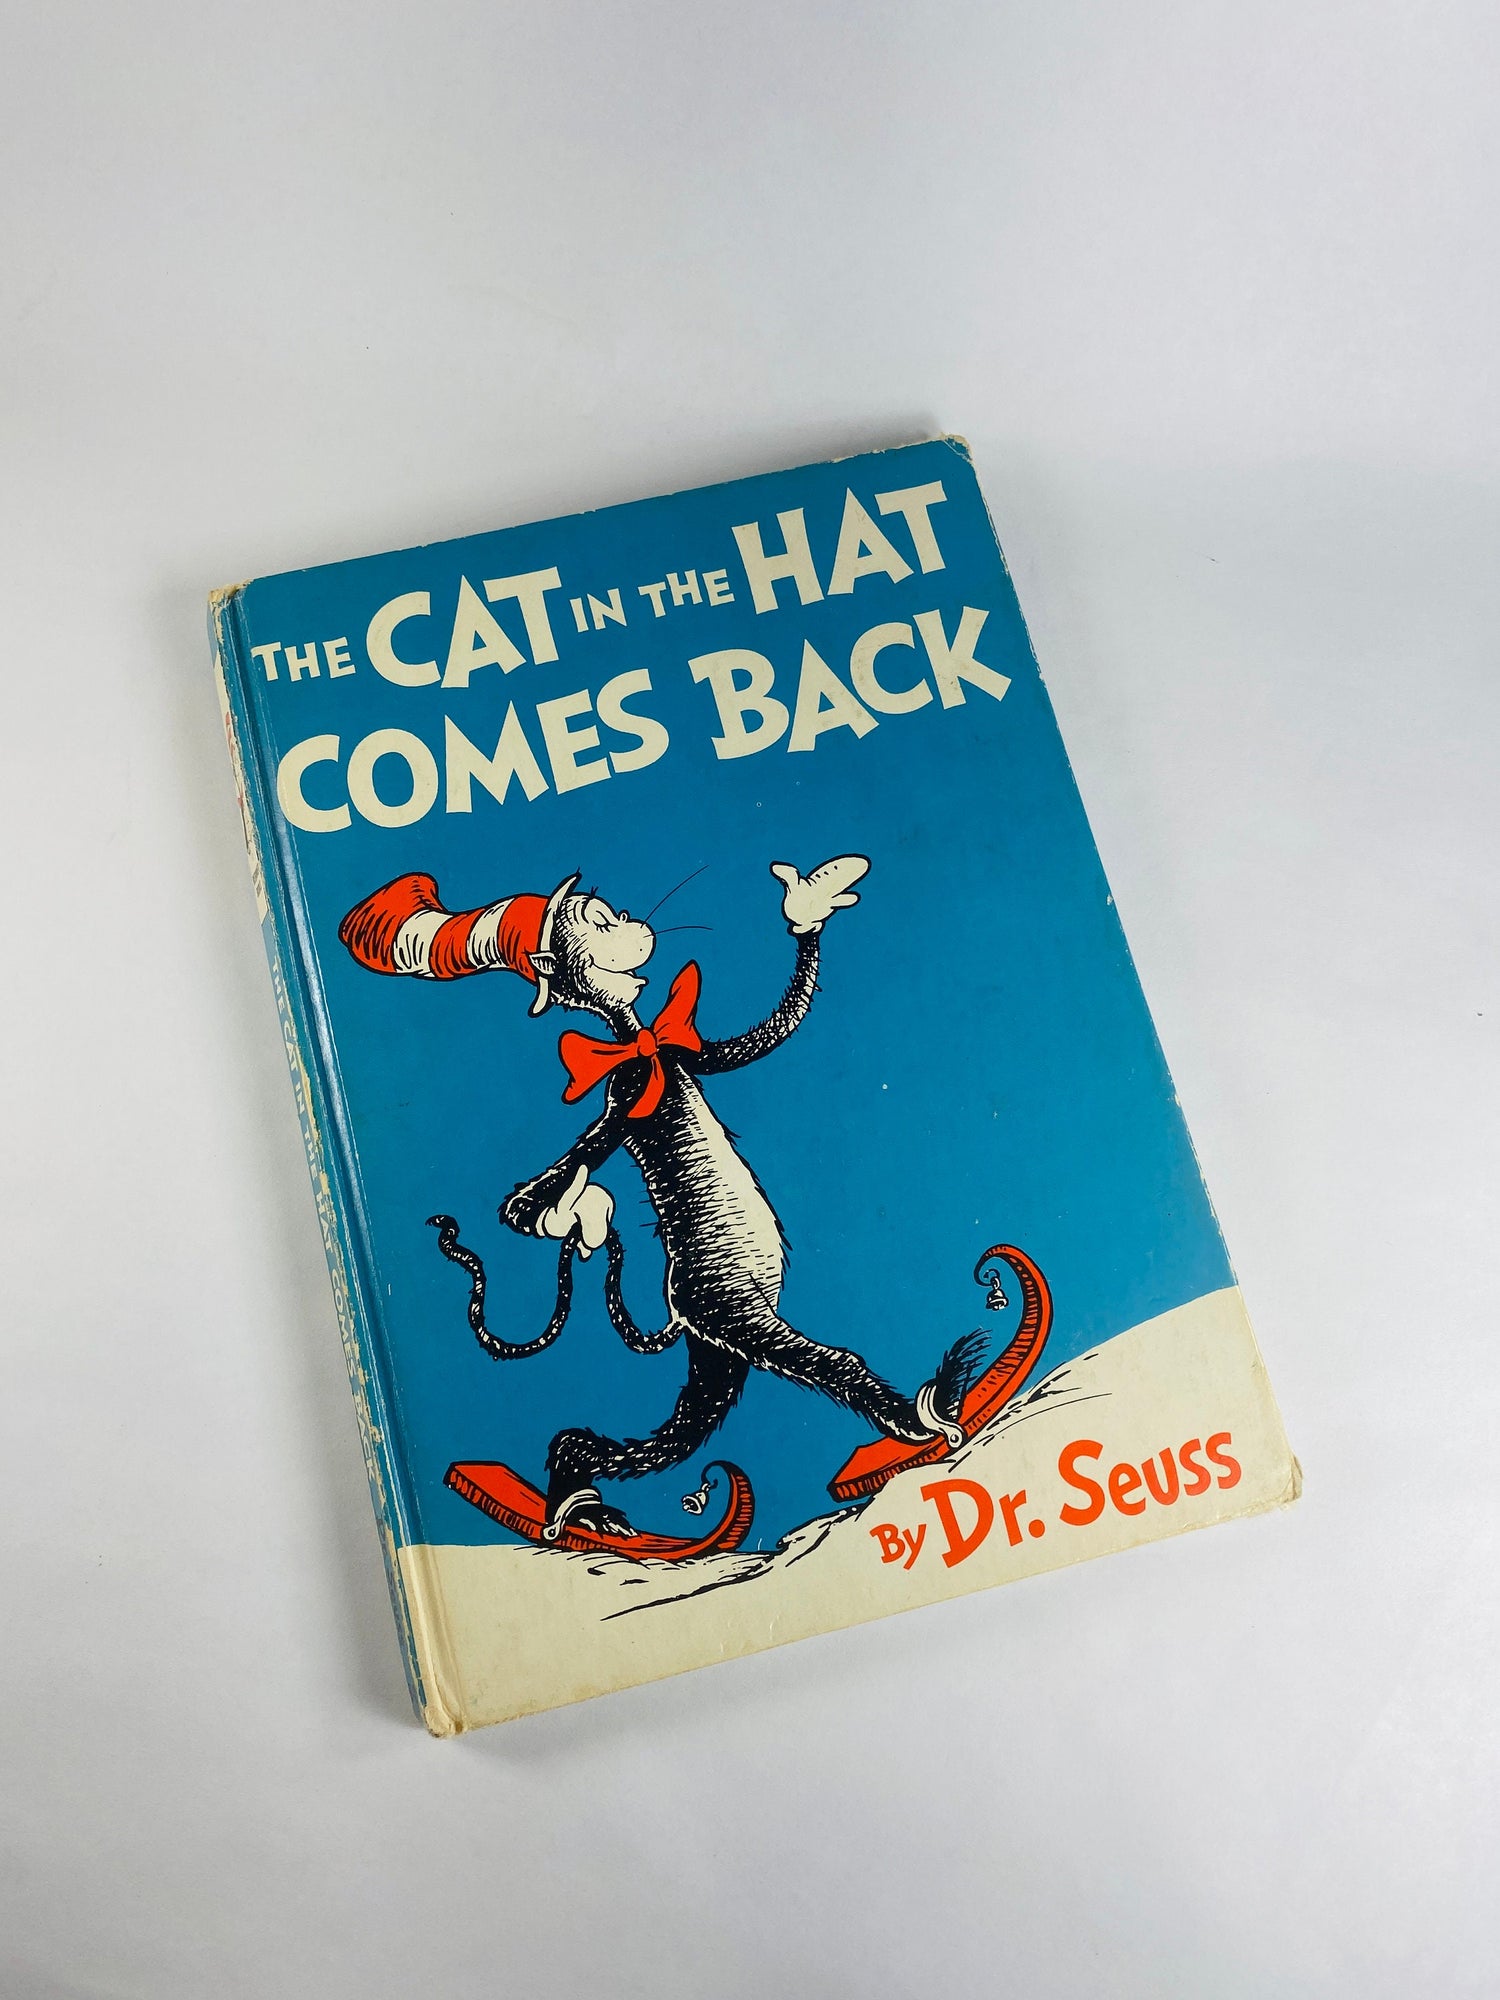 FIRST EDITION Dr Seuss Cat in the Hat Comes Back Vintage collectible book pictoral boards circa 1958.